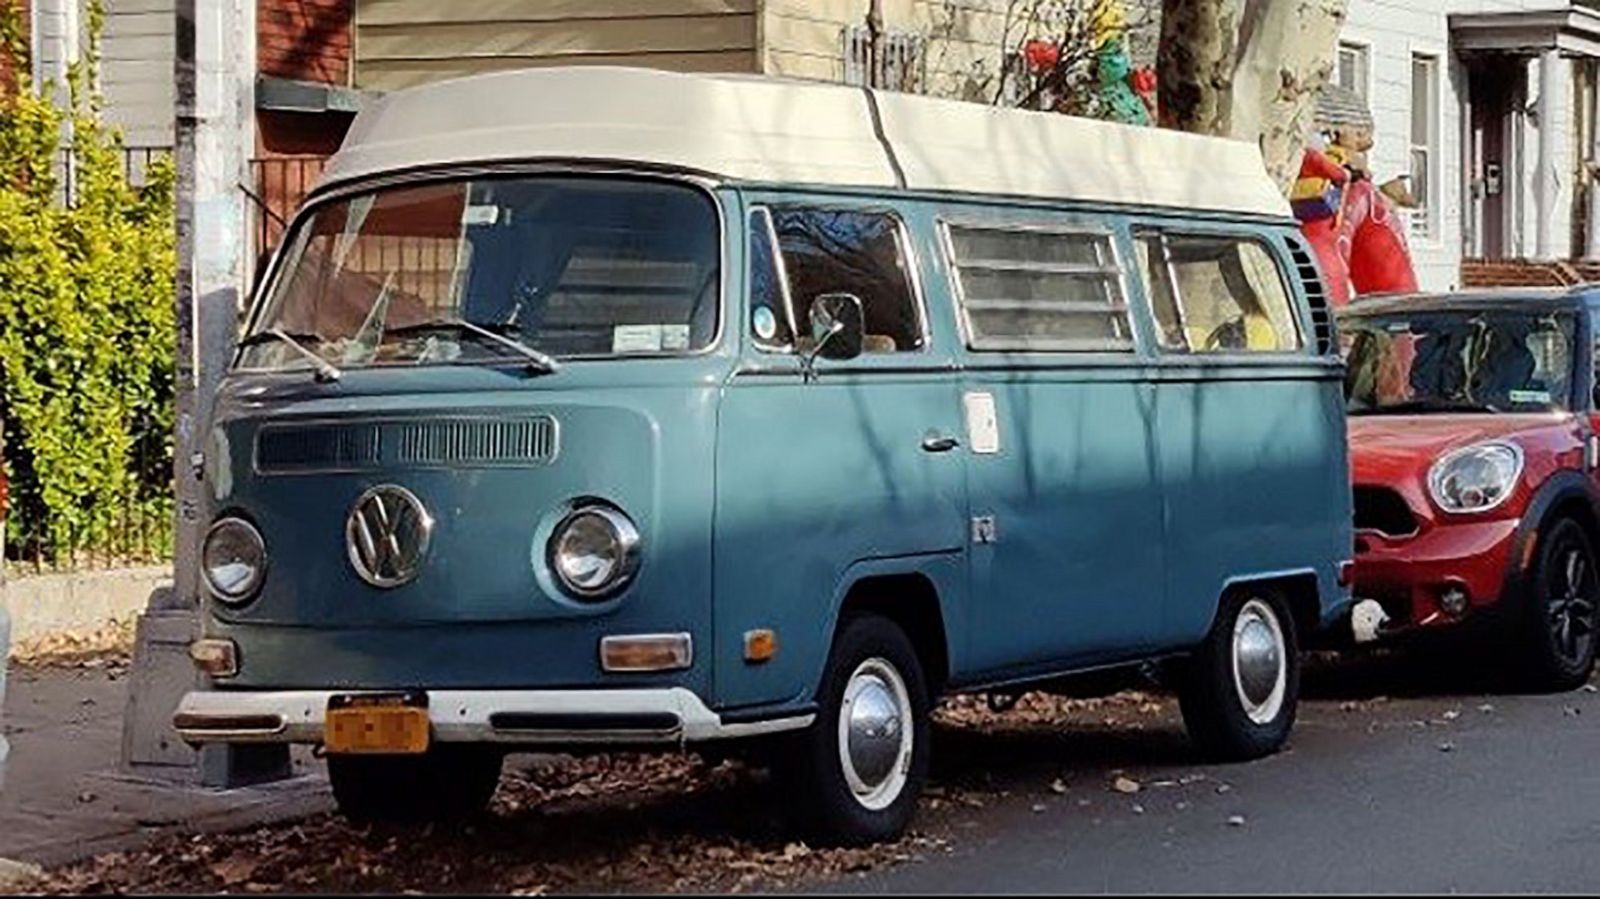 Return of the Microbus? Volkswagen electric 'hippie bus' - ABC